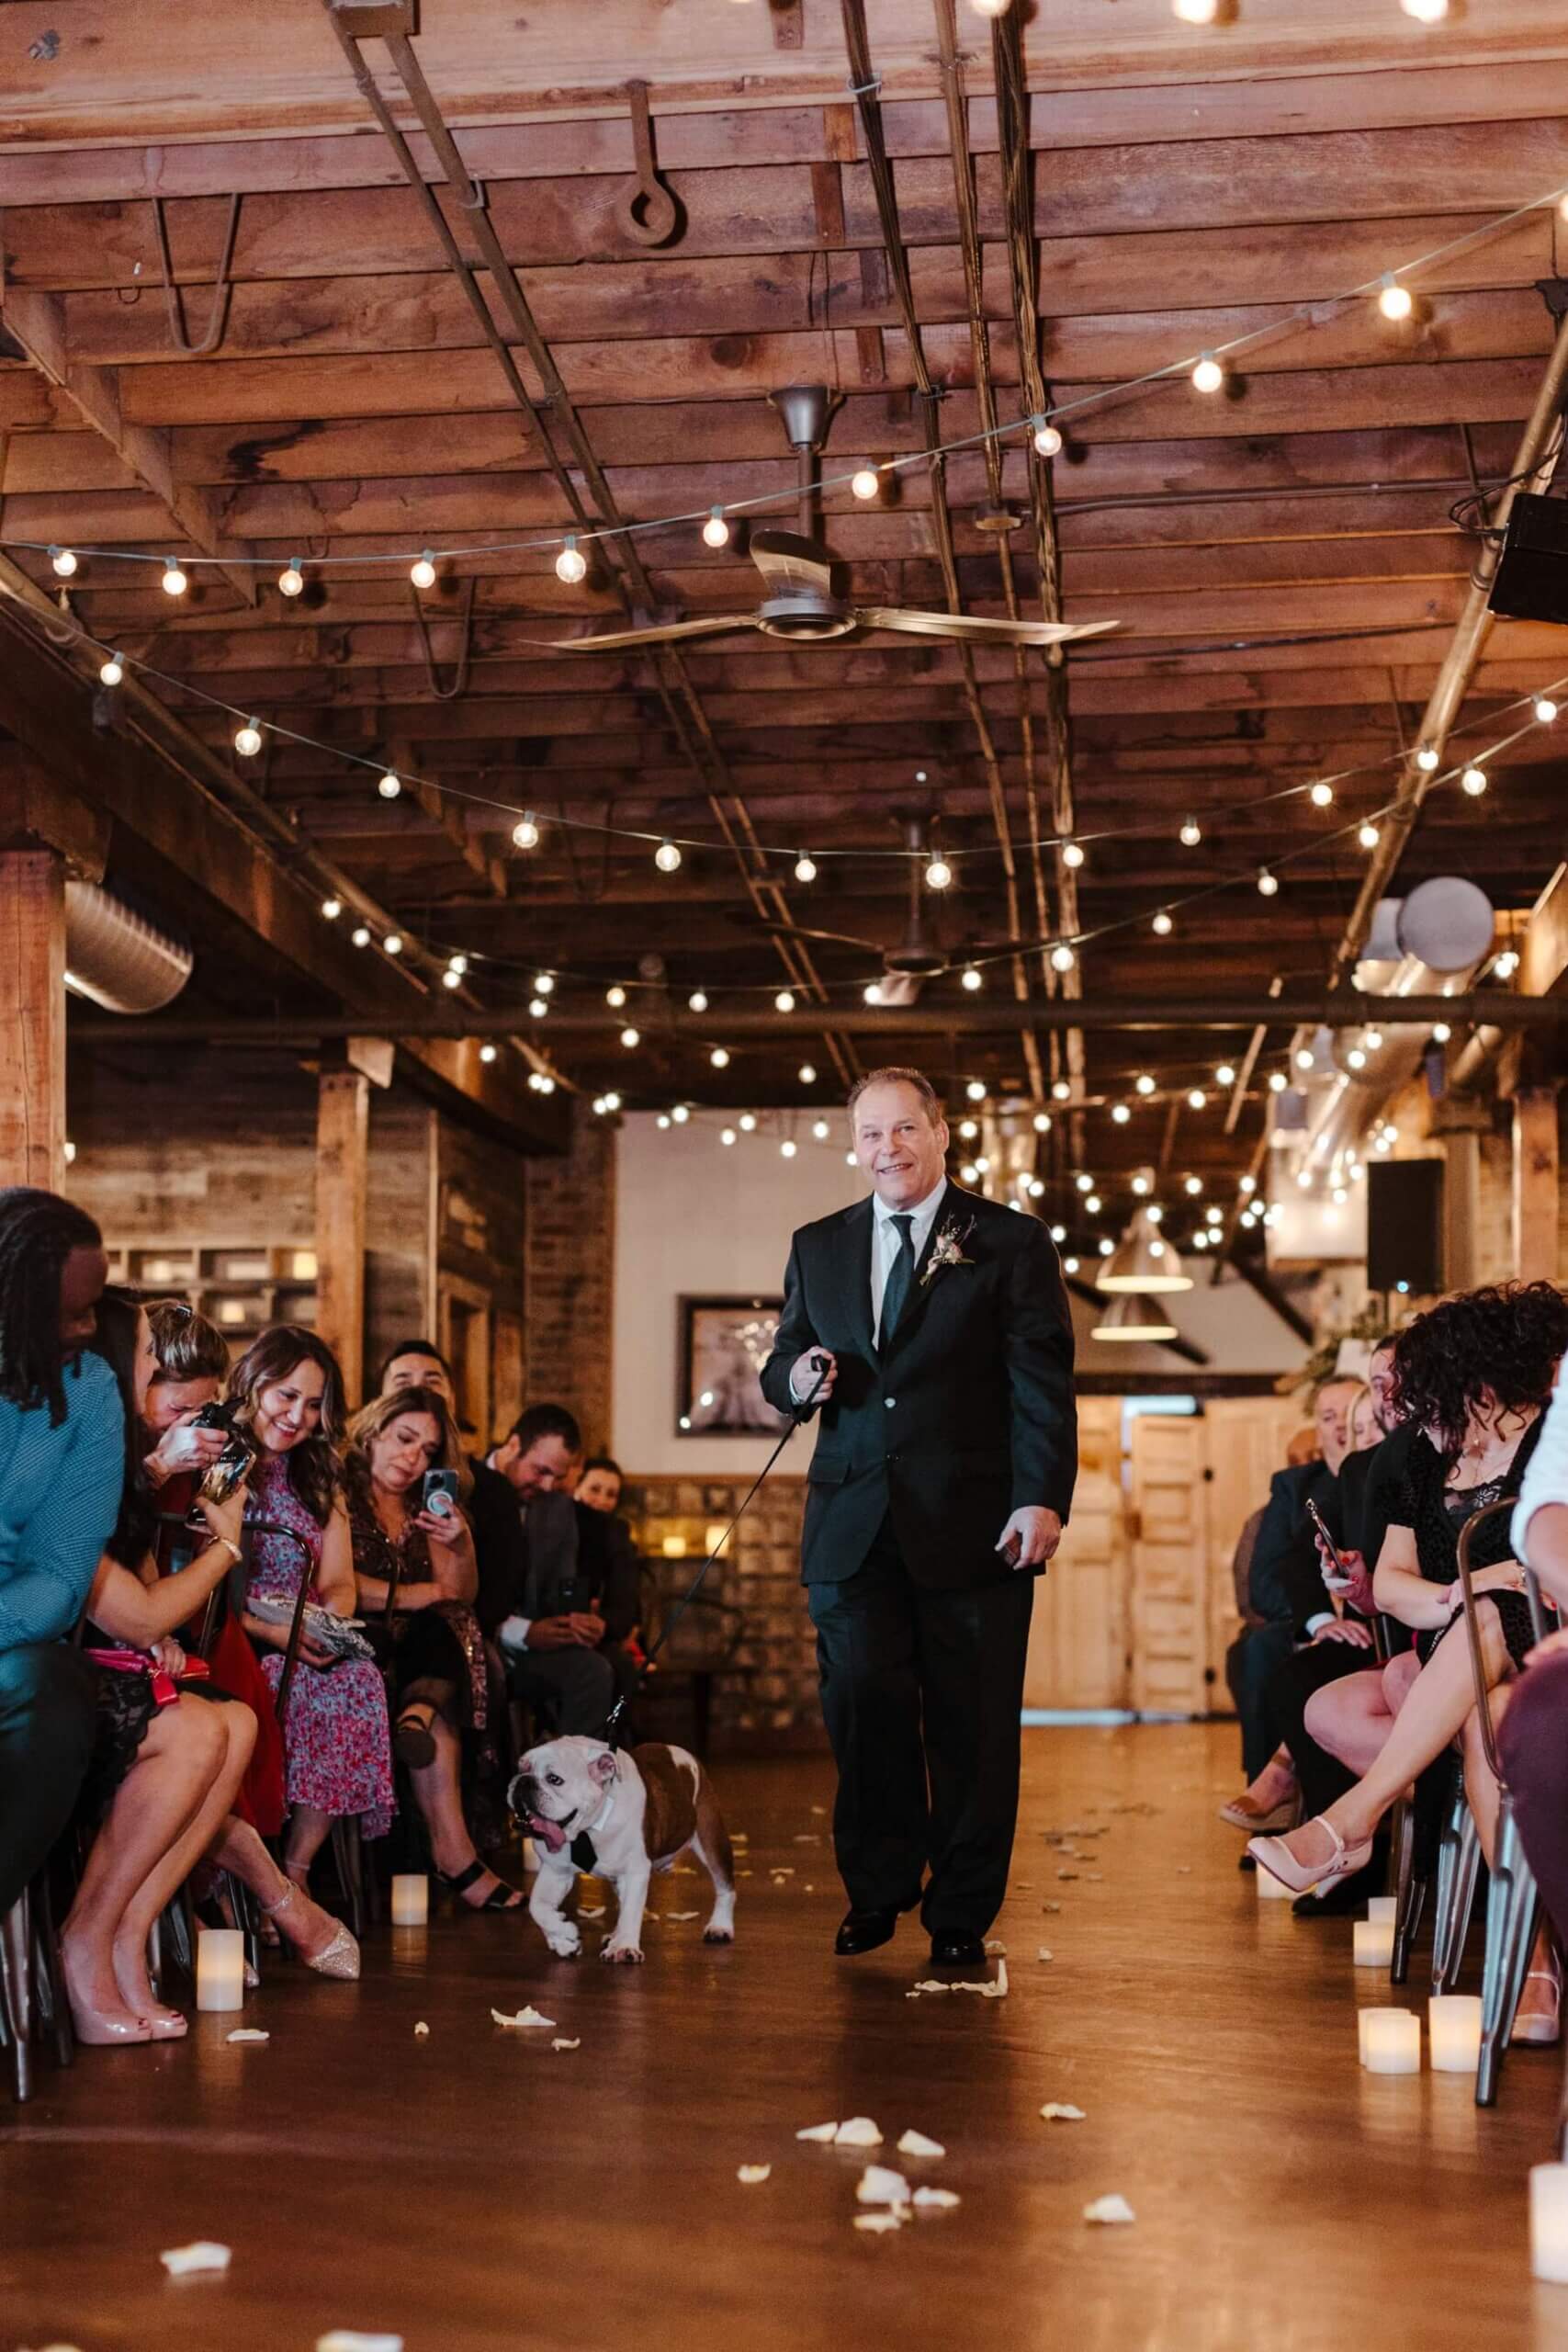 Bride and groom's bulldog walking down the aisle during ceremony